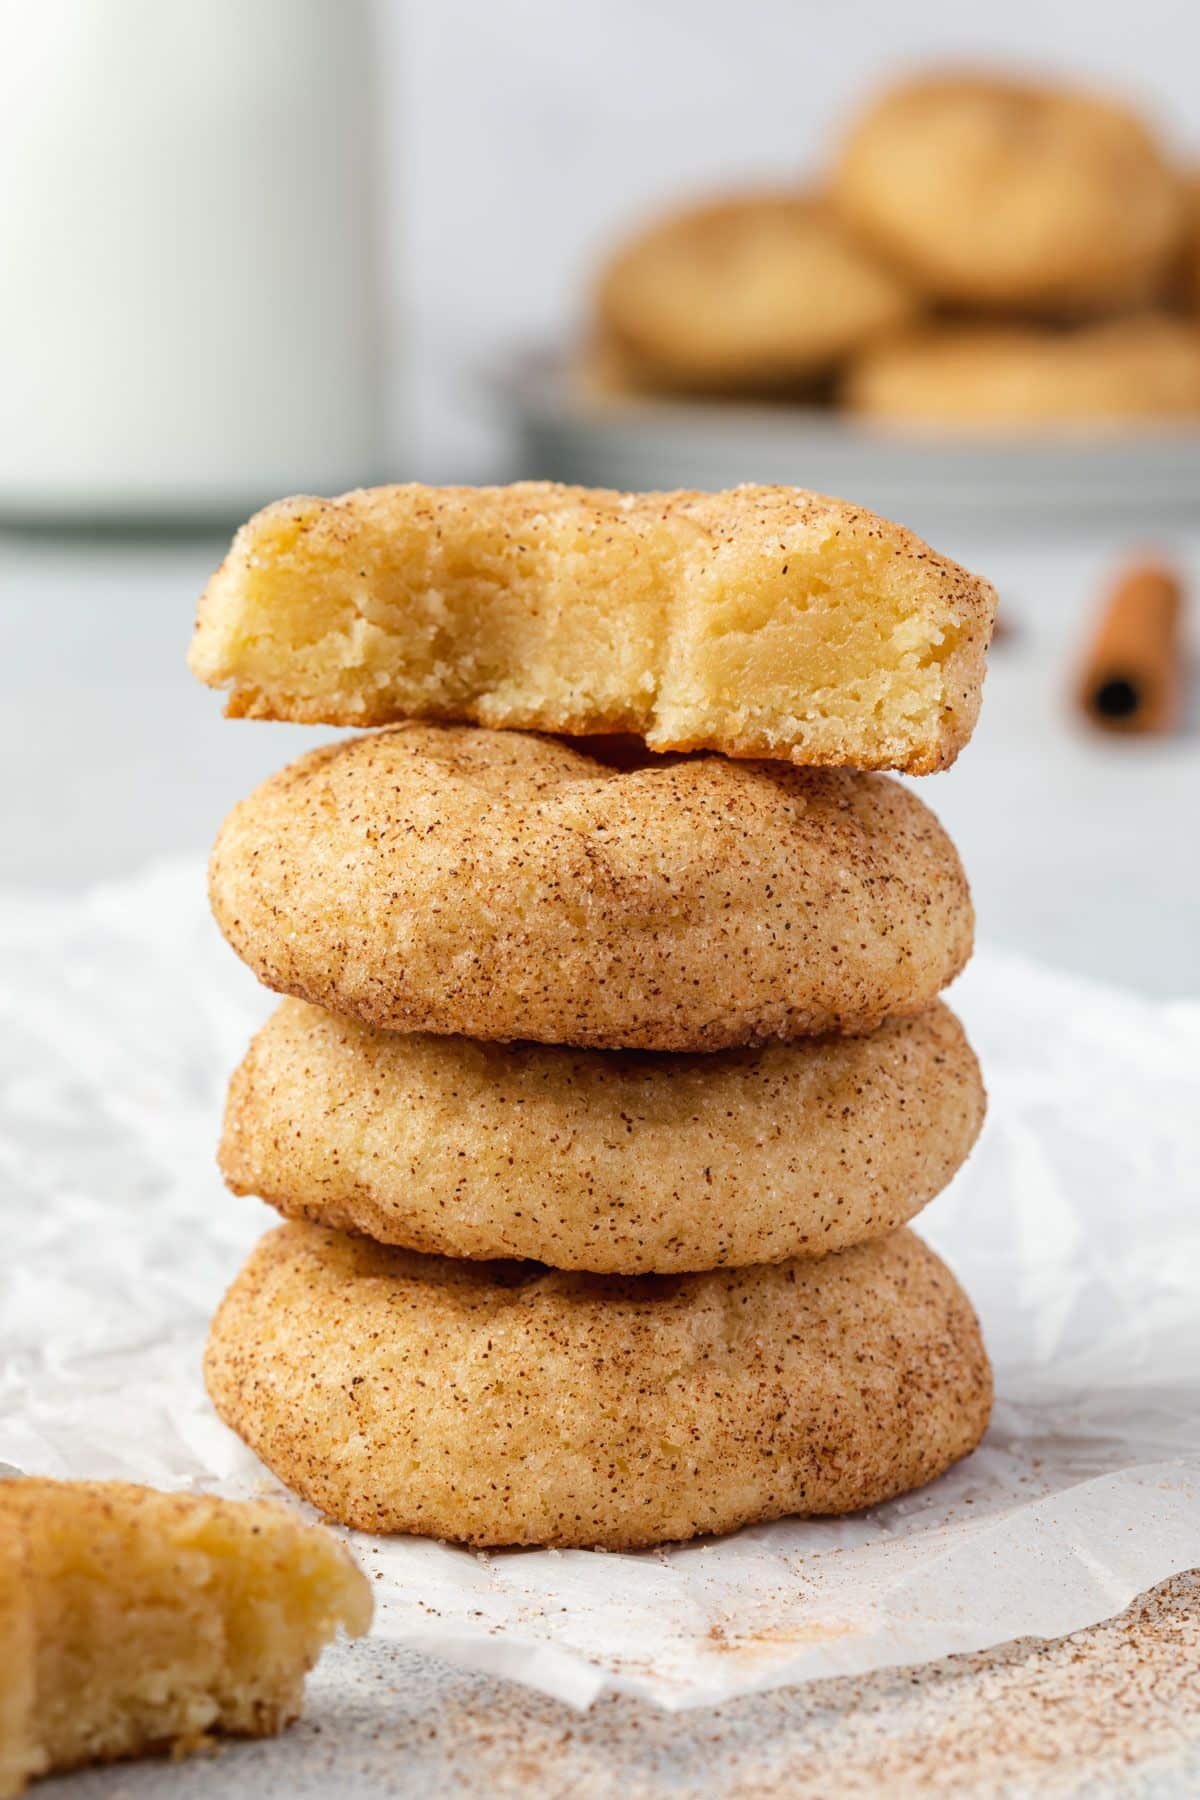 A stack of 4 thick snickerdoodle cookies. The top one has a bite out of it.